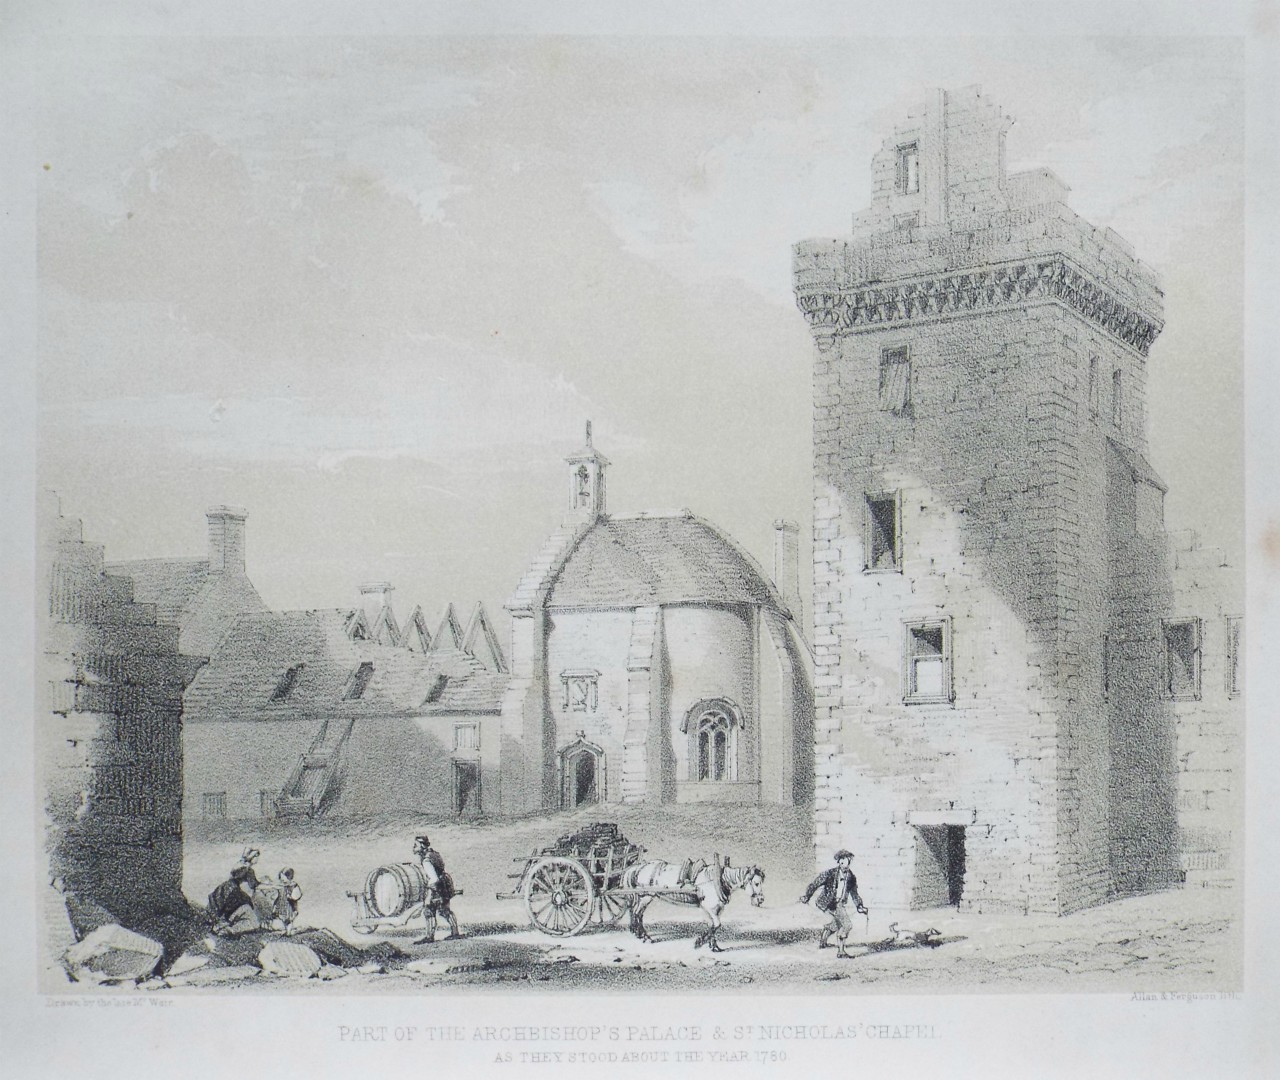 Lithograph - Part of the Archbishop's Palace & St. Nicholas' Chapel as they stood about the year 1780. - Allan